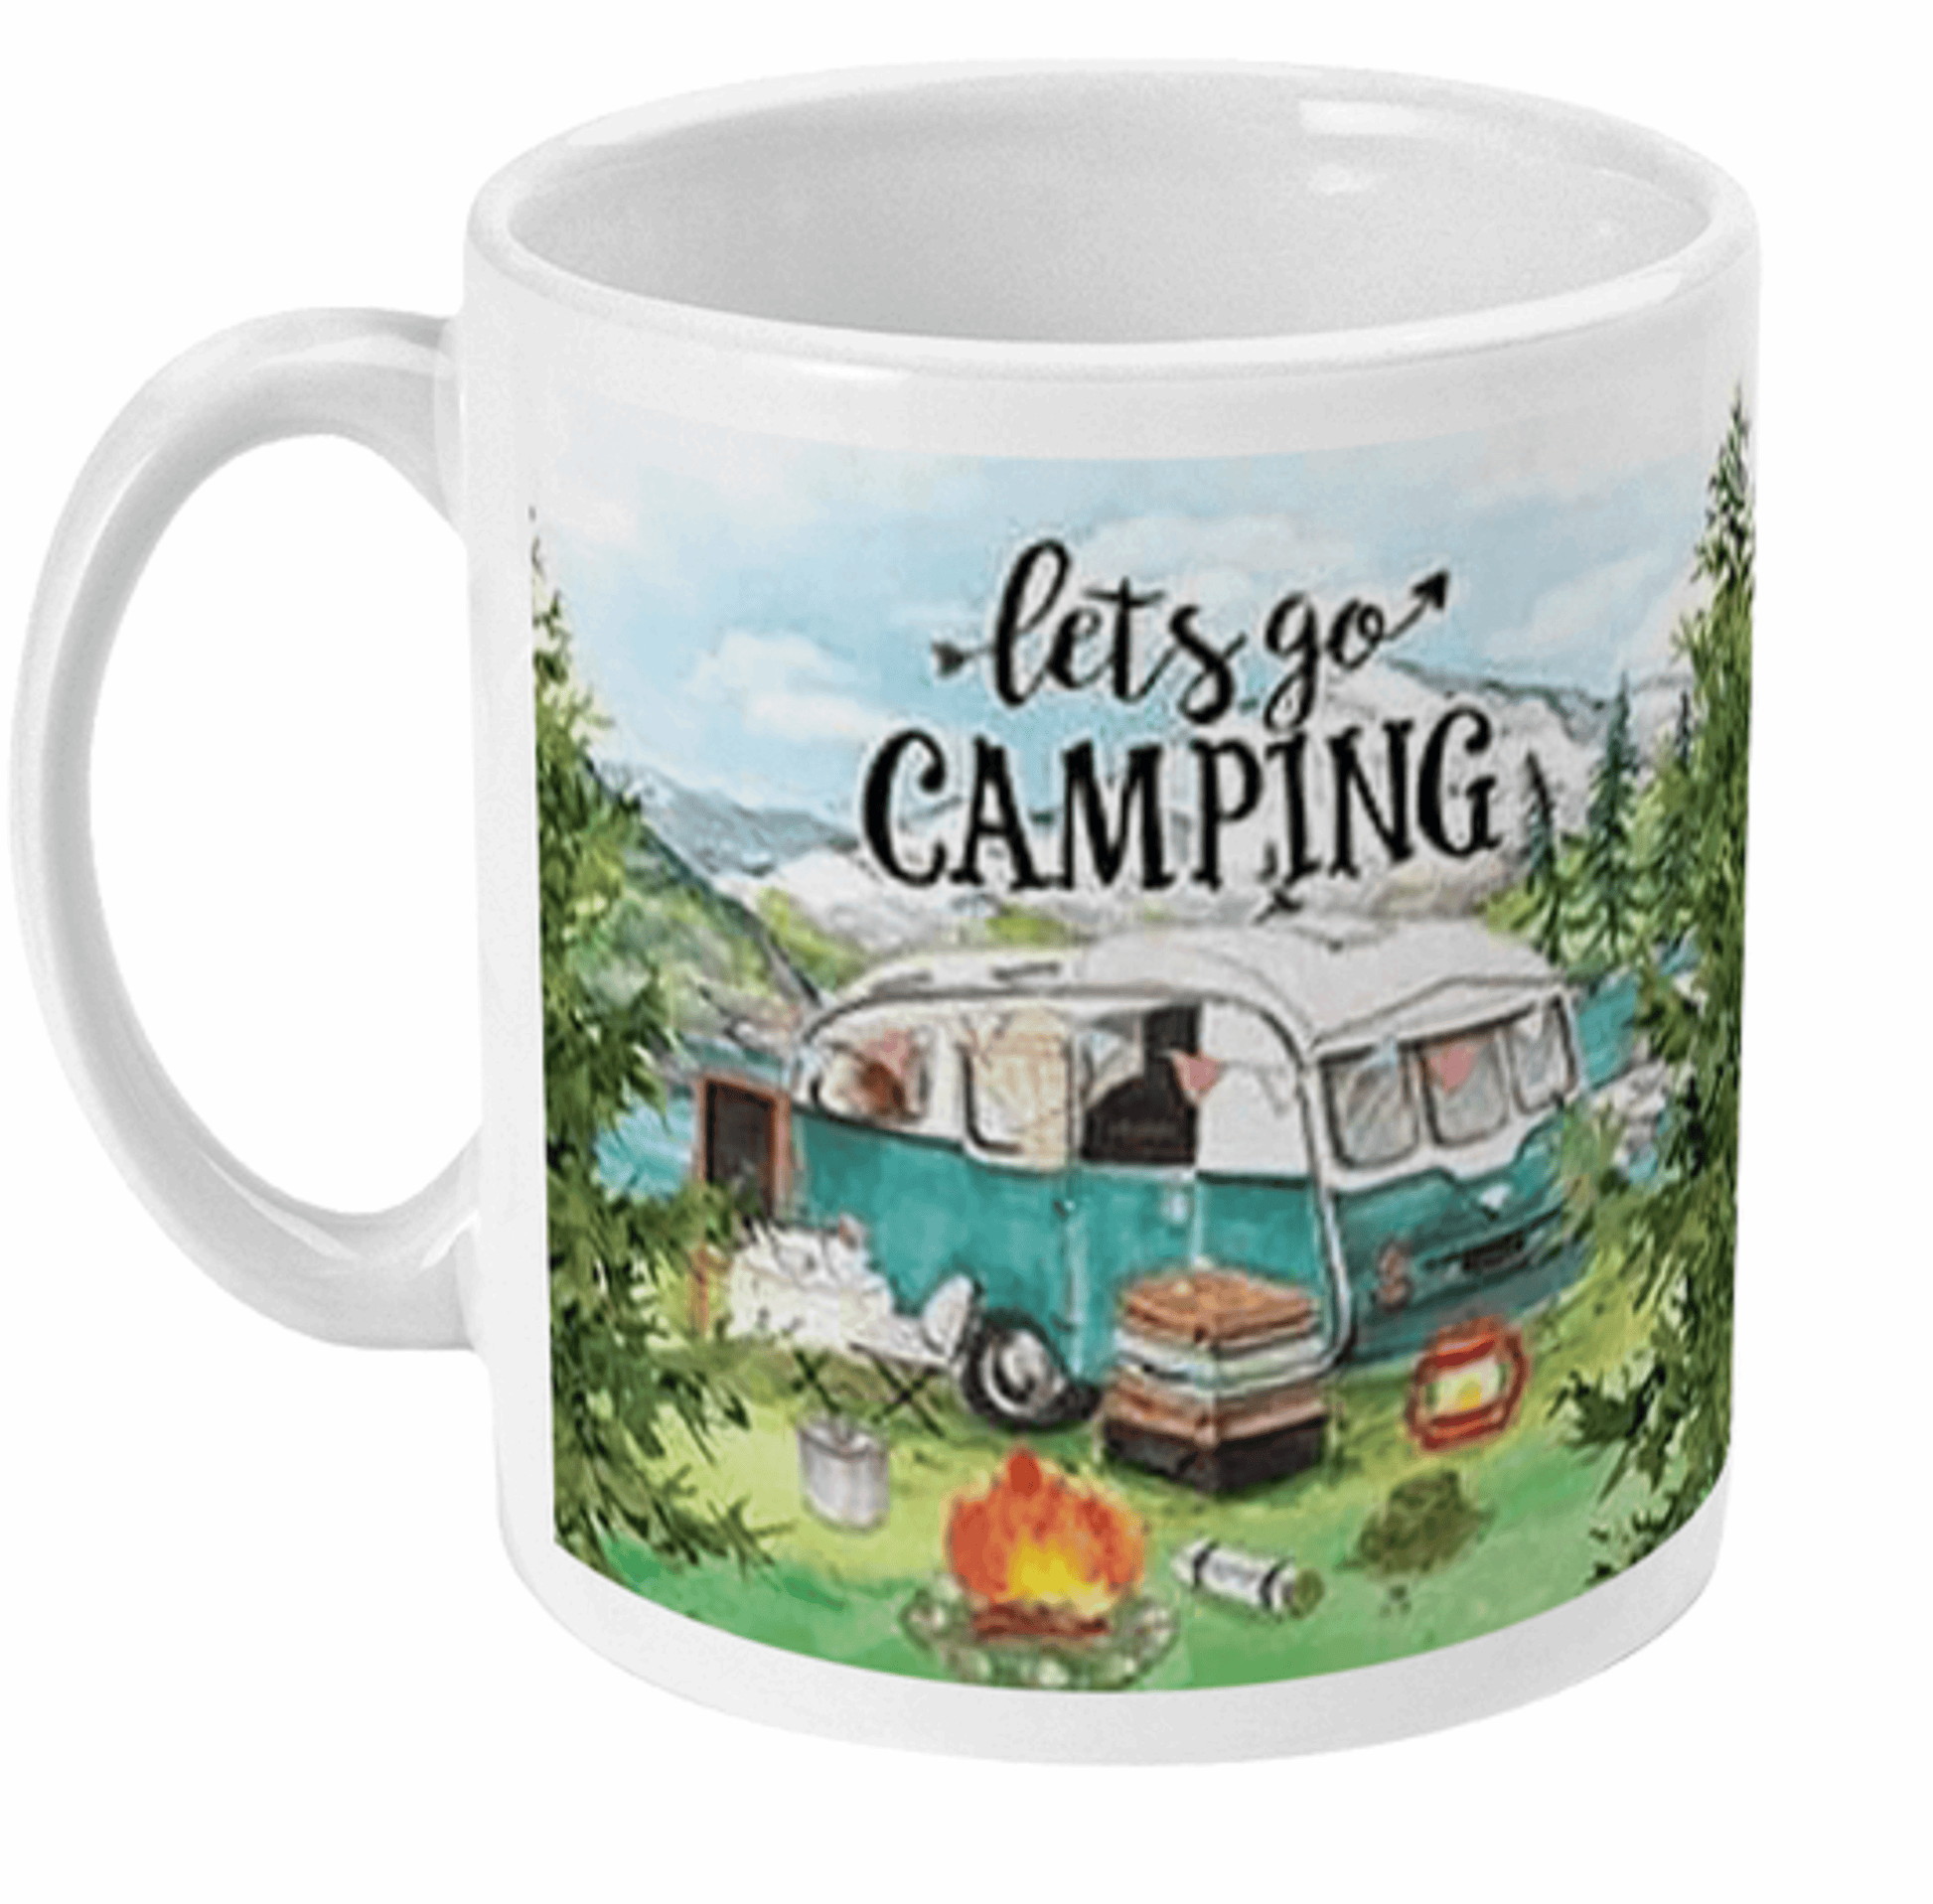  Lets Go Camping Coffee or Tea Mug by Free Spirit Accessories sold by Free Spirit Accessories